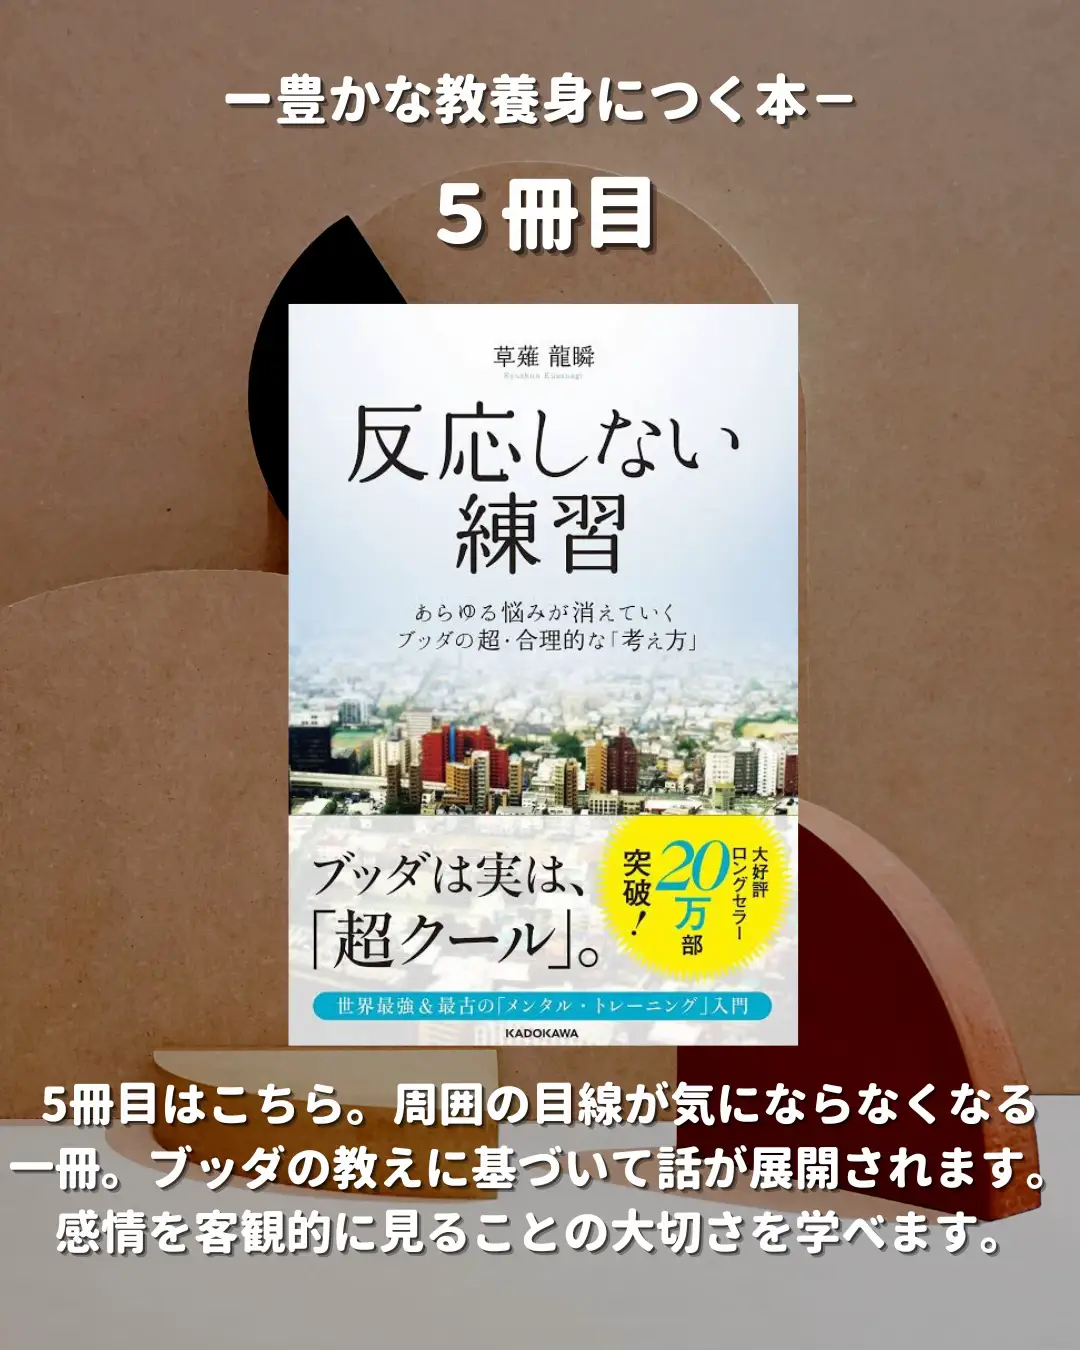 Books about Personal Growth - Lemon8検索